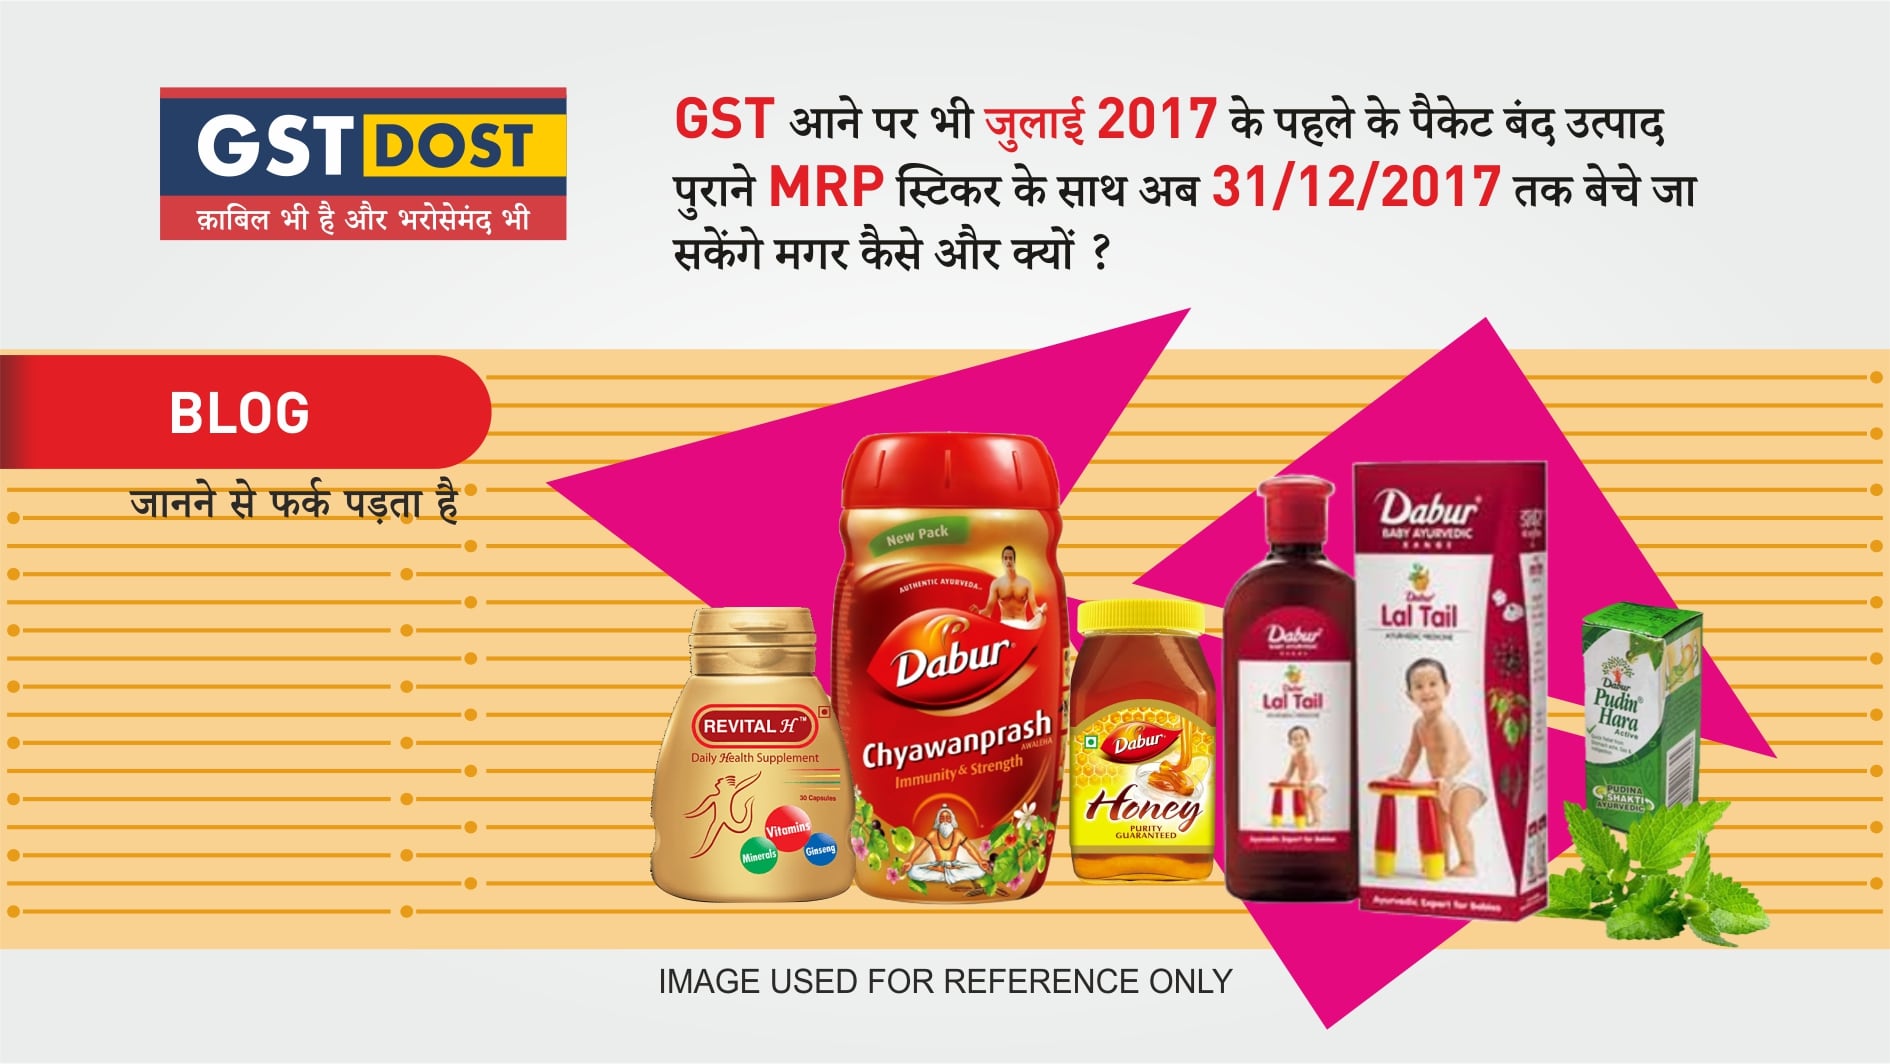 Last Date of Sale of Old Stock with MRP